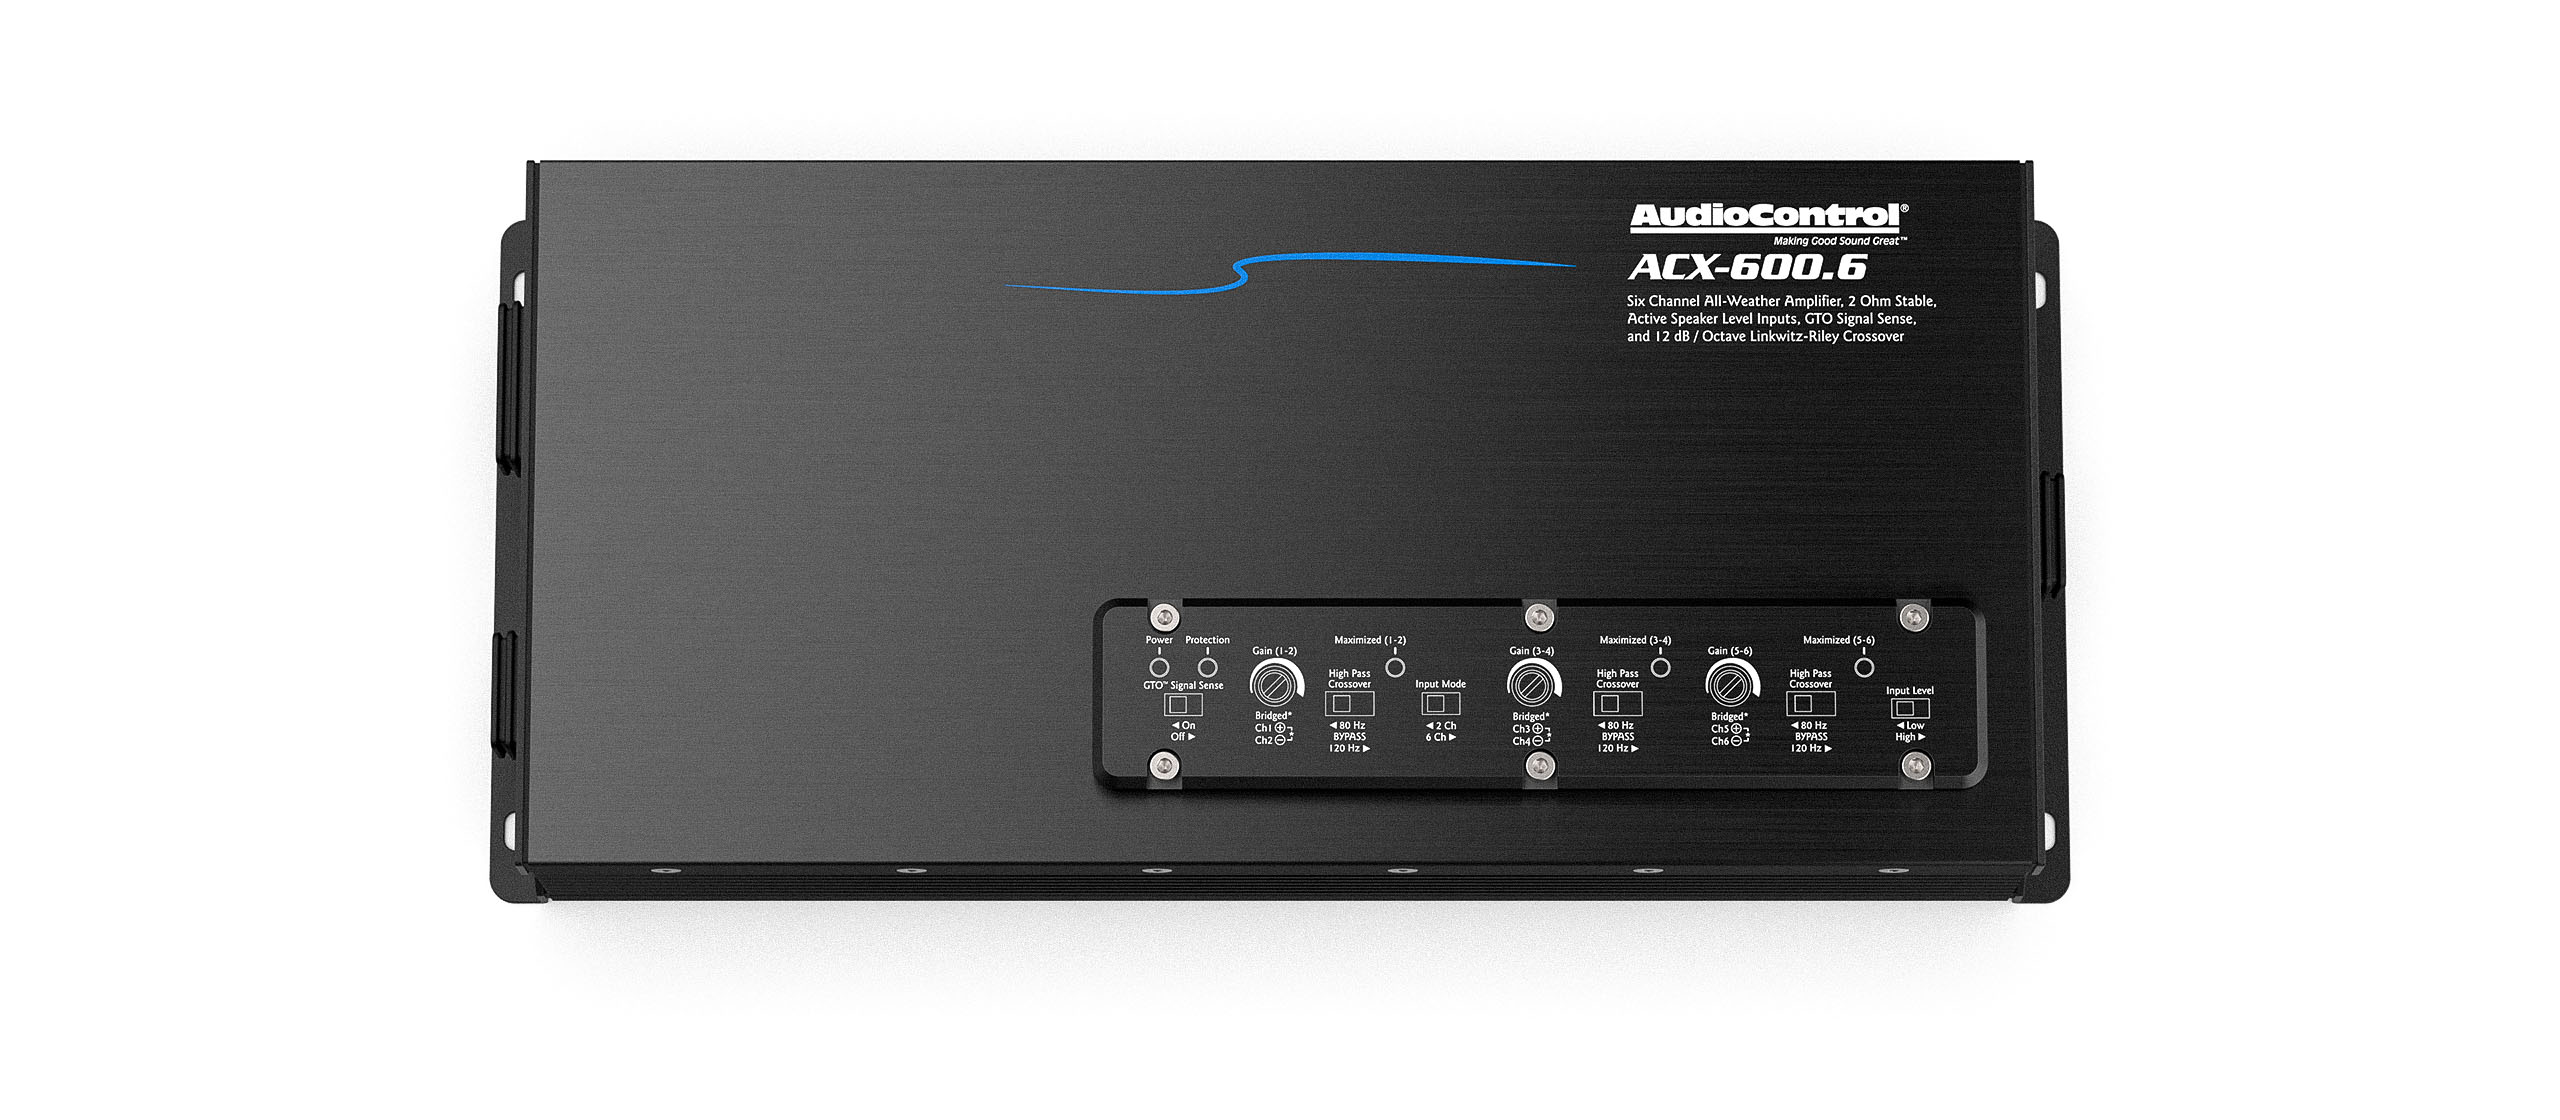 acx-600.6-top